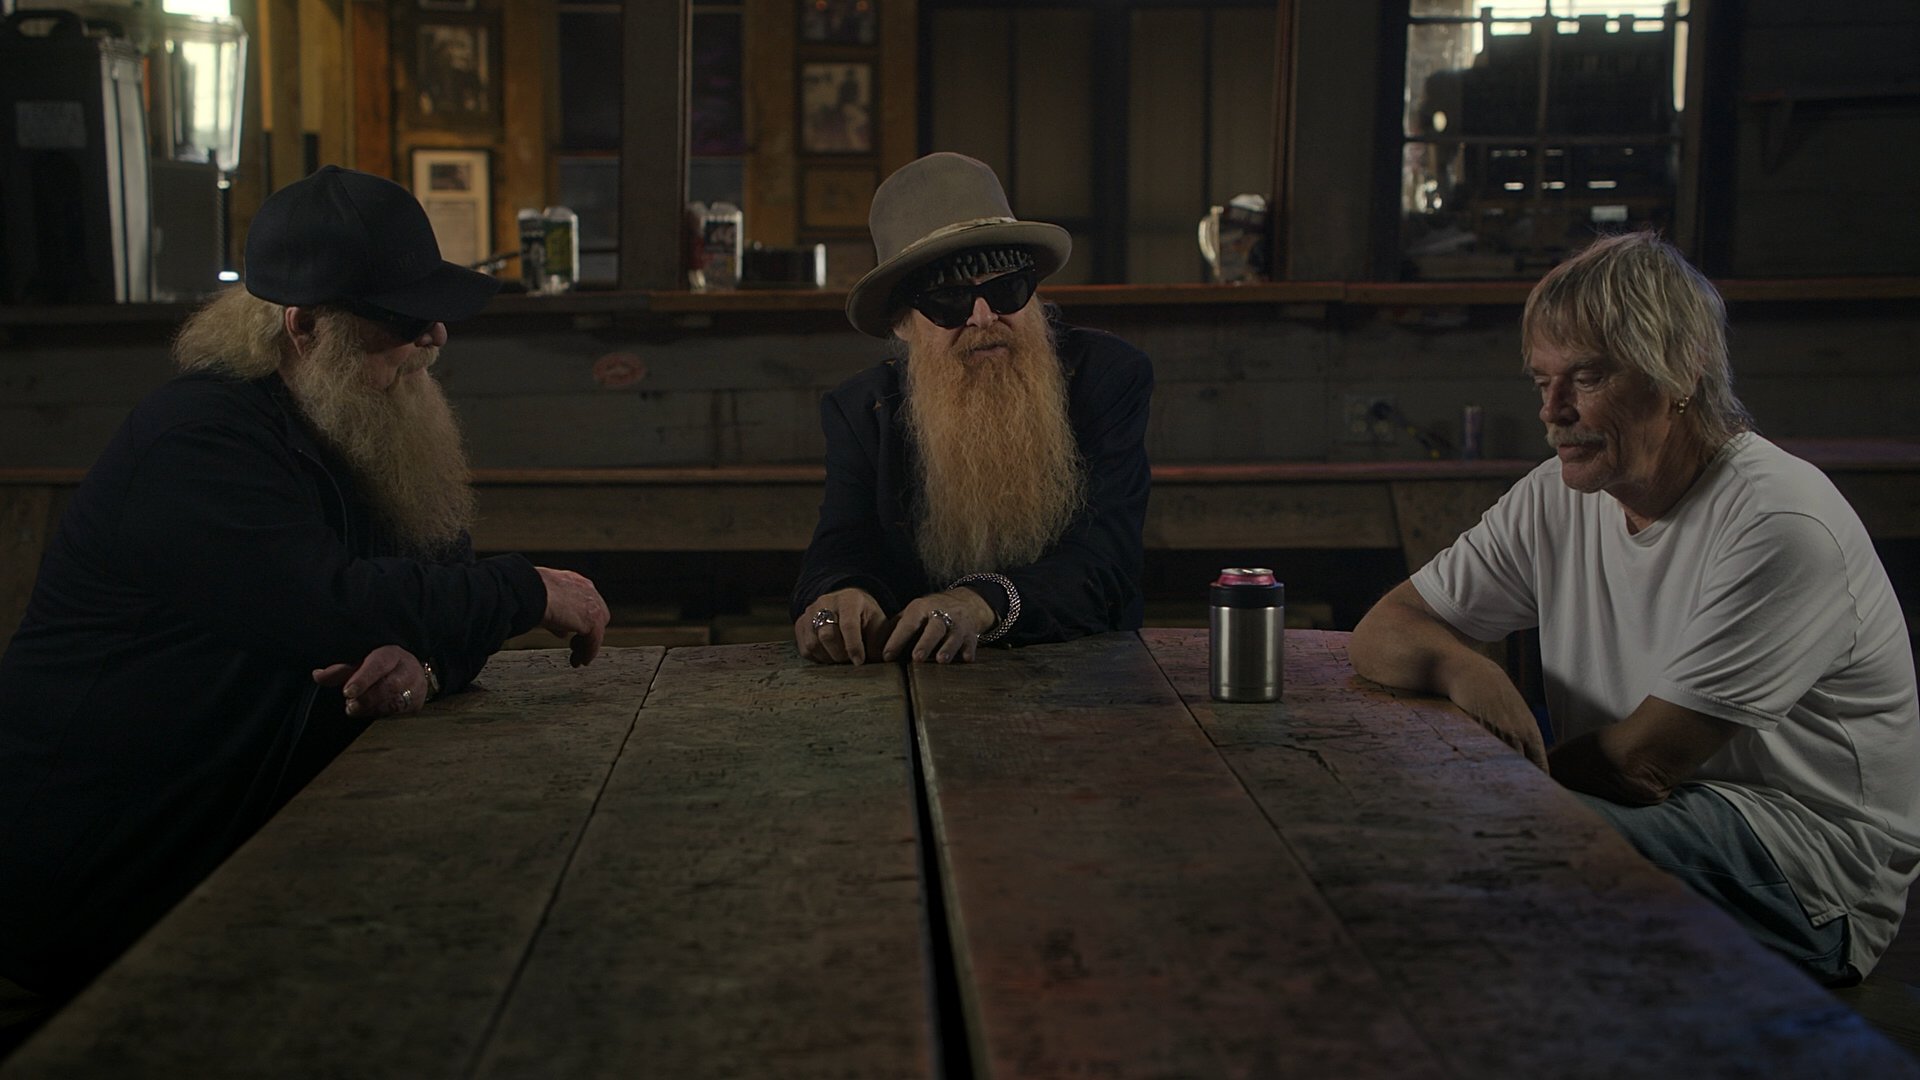 ZZ Top: That Little Ol Band from Texas Documentary, Tampa 